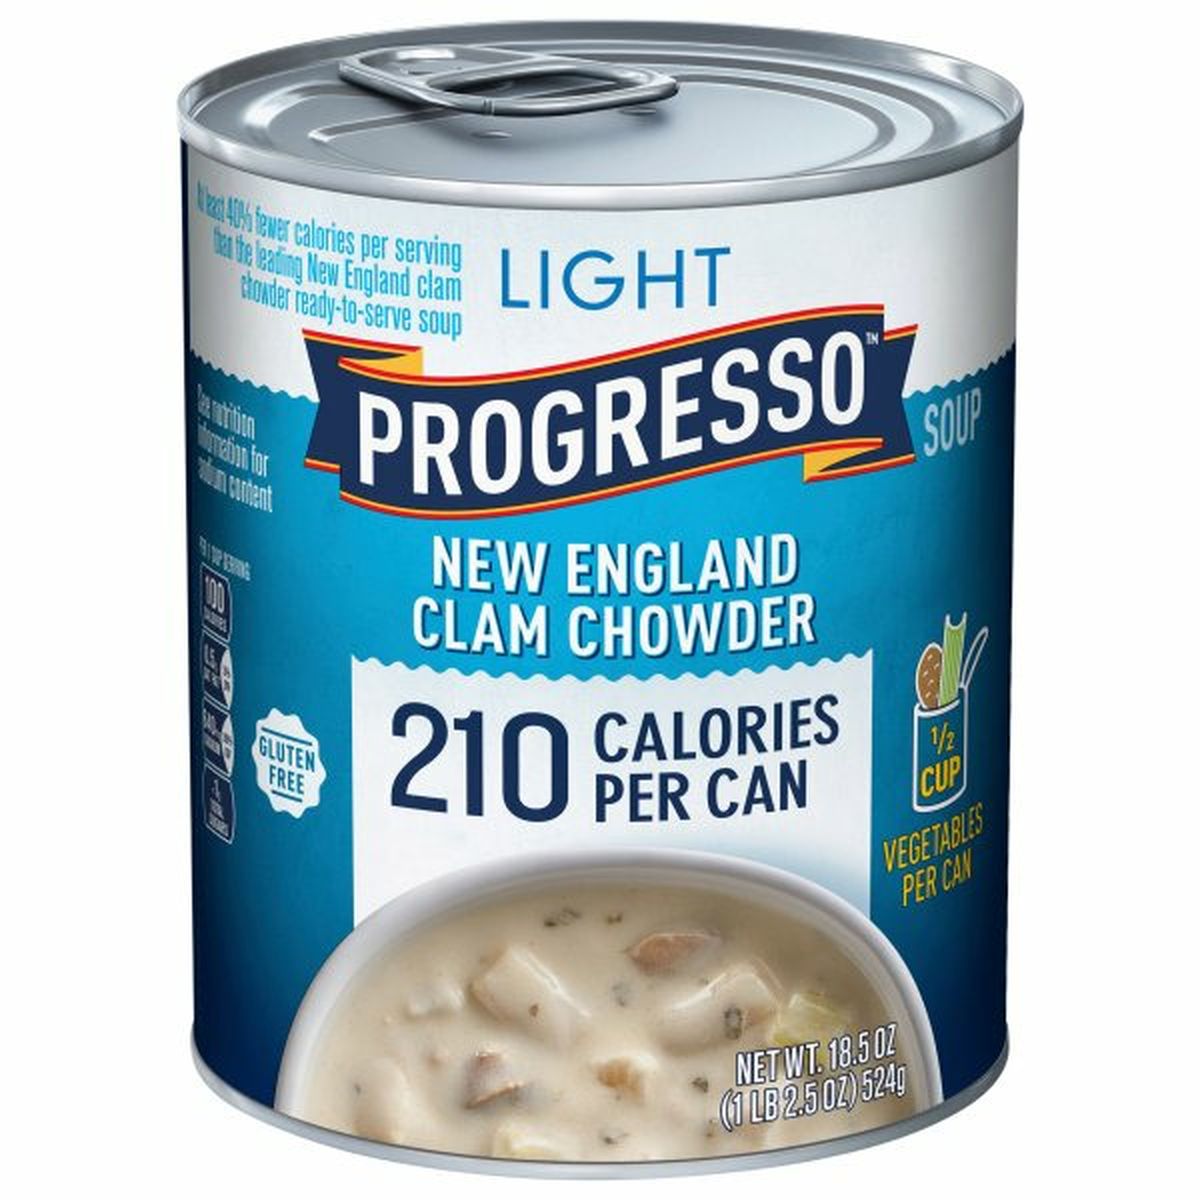 Calories in Progresso Soup, New England Clam Chowder, Light